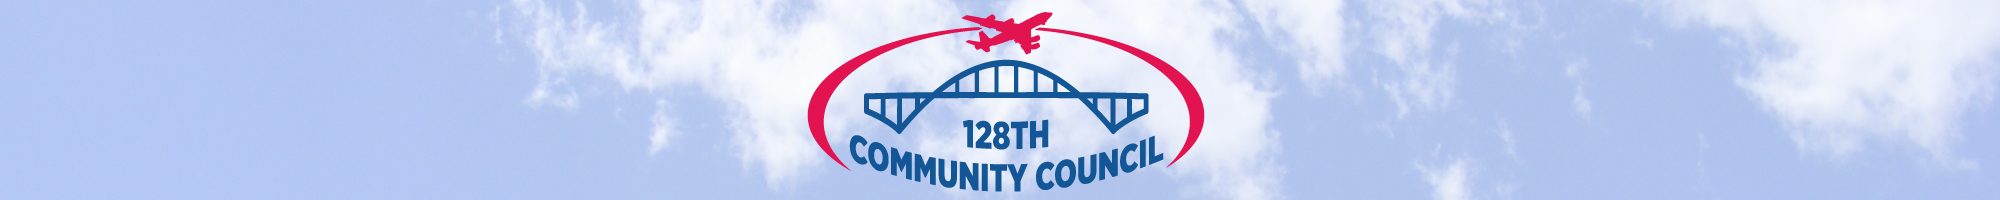 128th Air Refueling Wing Community Council